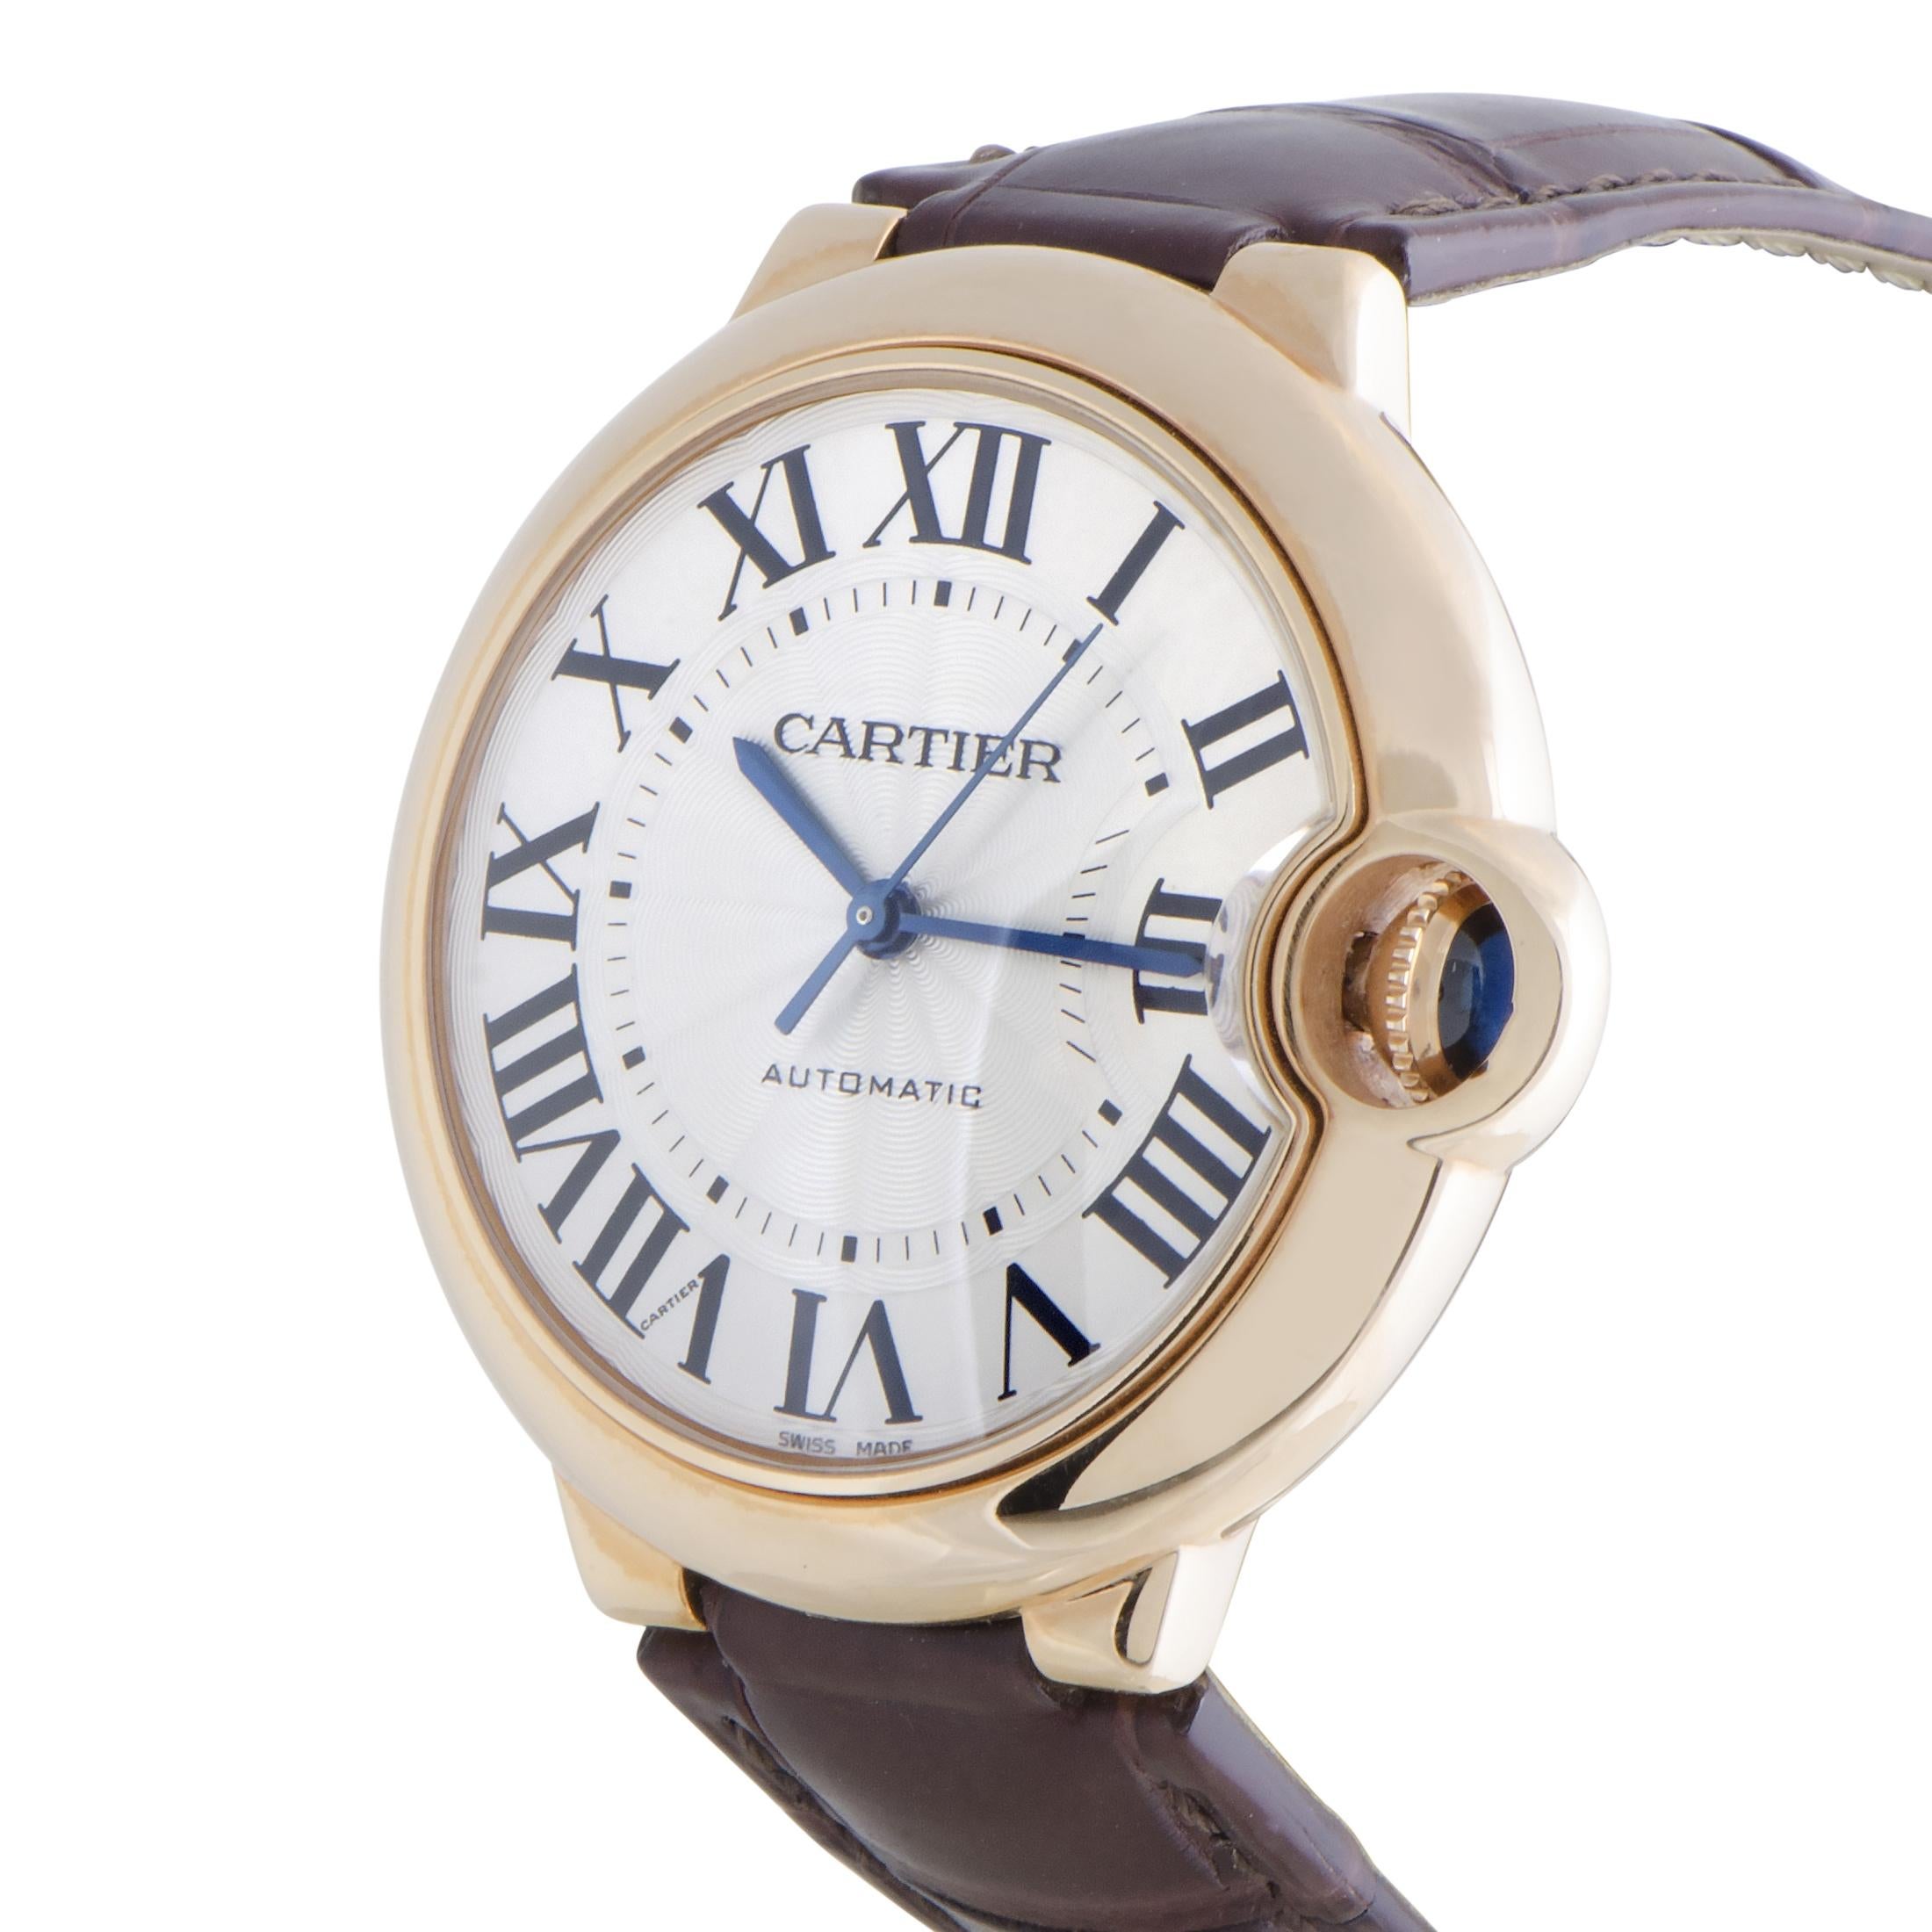 Designed in the brand’s distinctive and highly renowned style of traditional elegance and prestigious excellence, this remarkable timepiece from Cartier offers the essential timekeeping indications in a tasteful, timeless, and exquisitely executed